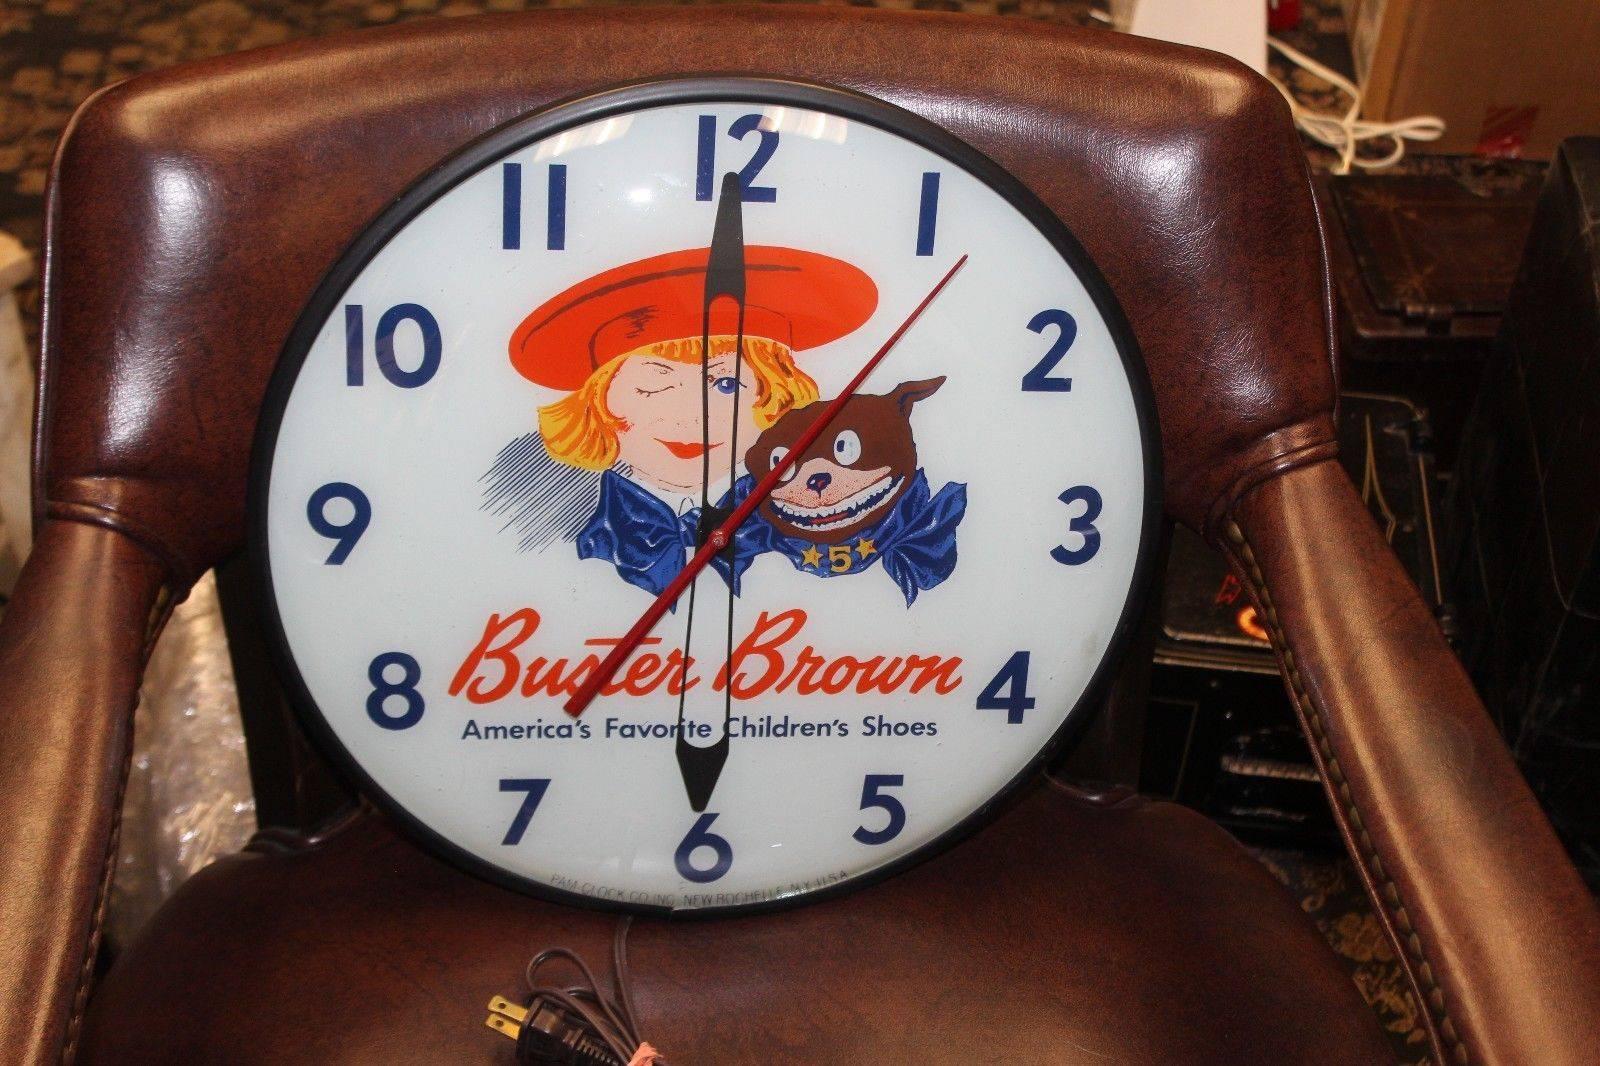 Mid-Century Modern 1940s Buster Brown Shoes Pam Co. Advertising Vintage Lighted Wall Clock For Sale